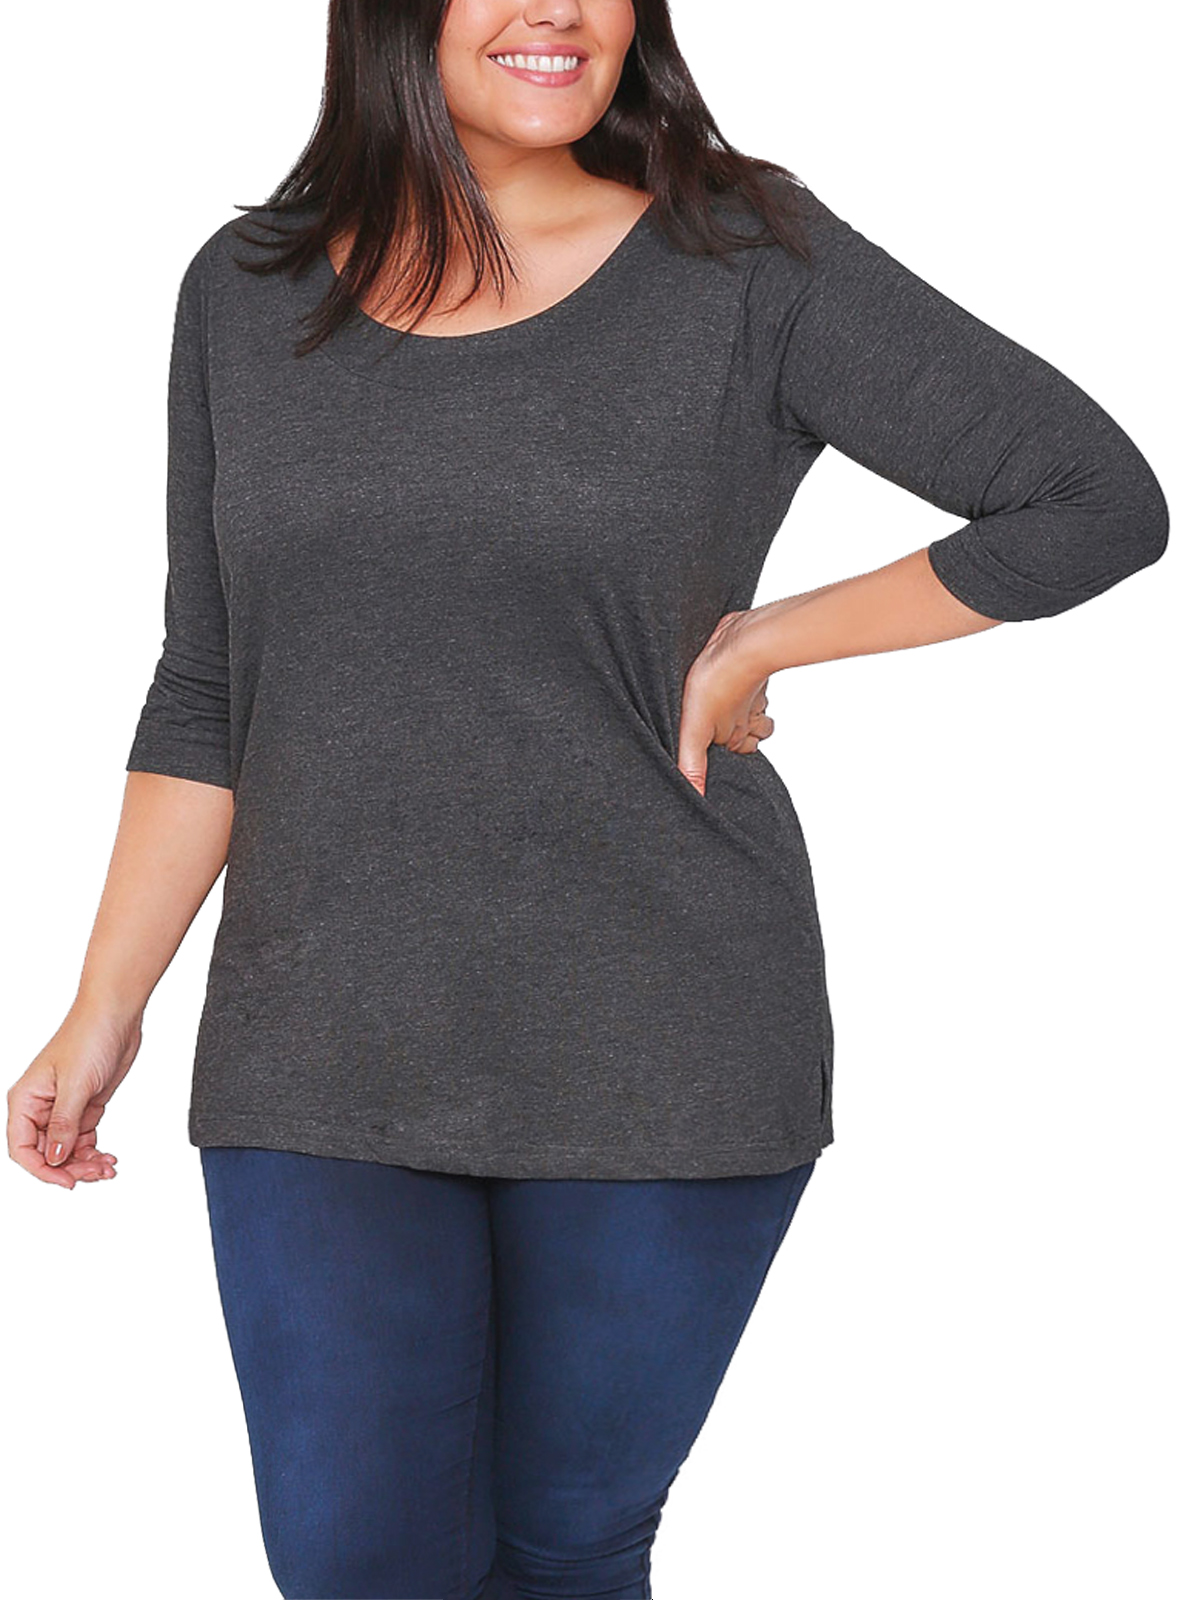 CURVE - - Y0urs CHARCOAL Band Scoop Neckline 3/4 Sleeves T-Shirt - Plus ...